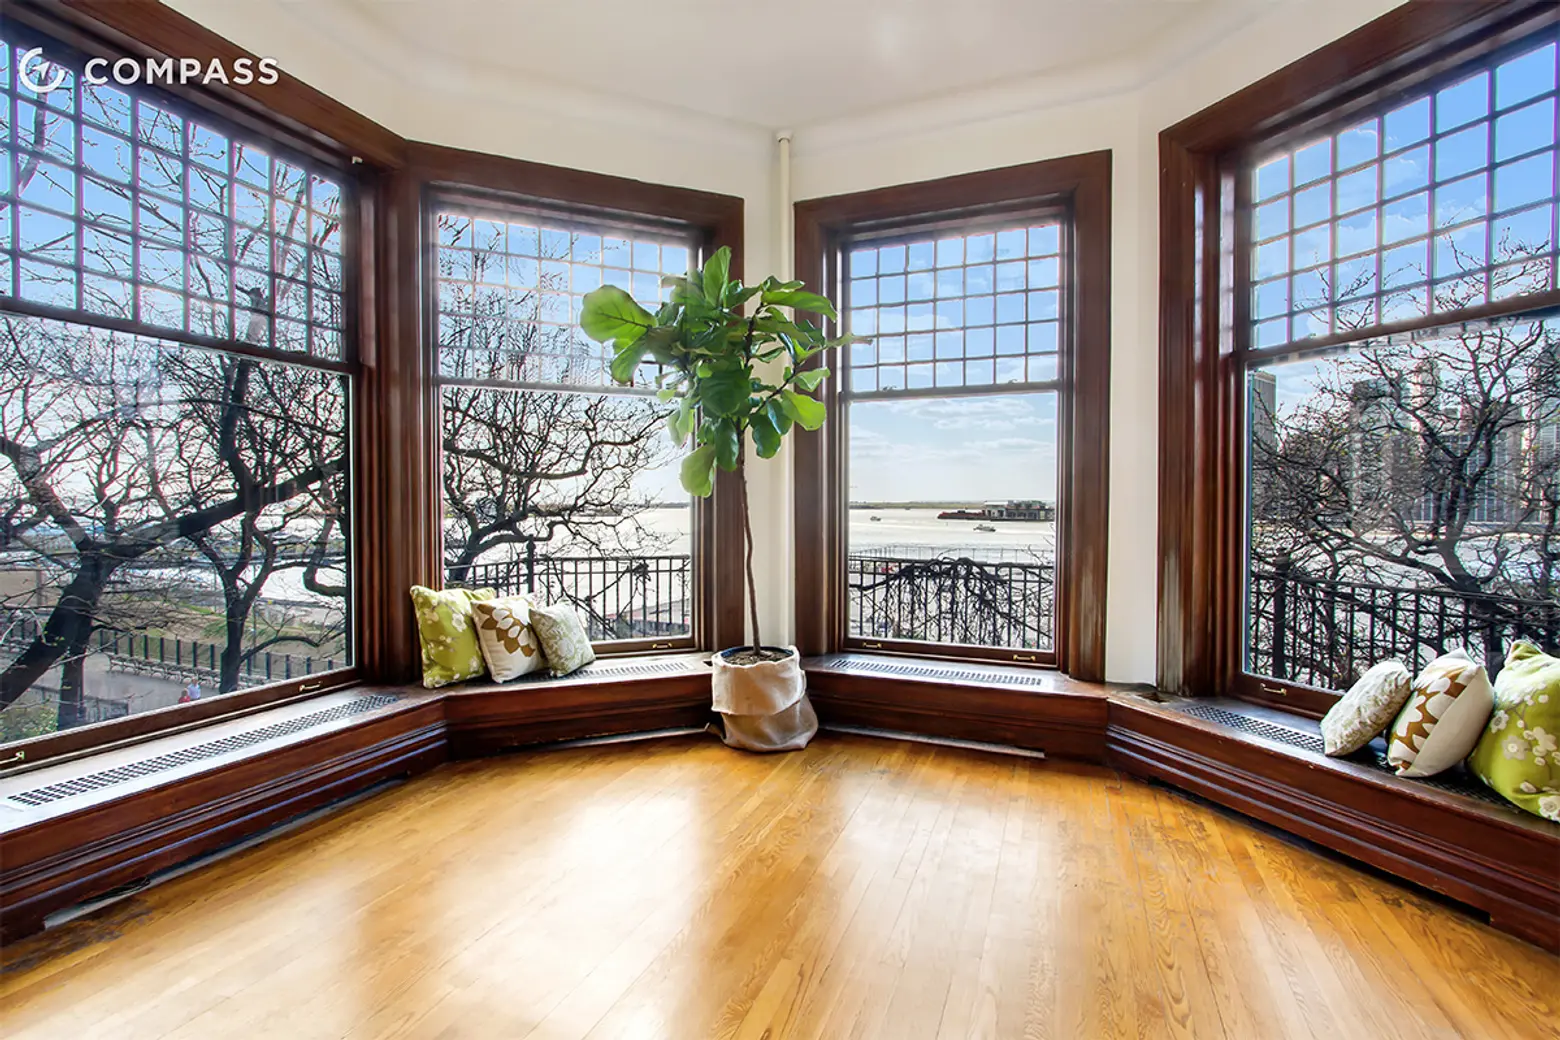 Brooklyn Heights Apartment Has Amazing Windows for Amazing Views